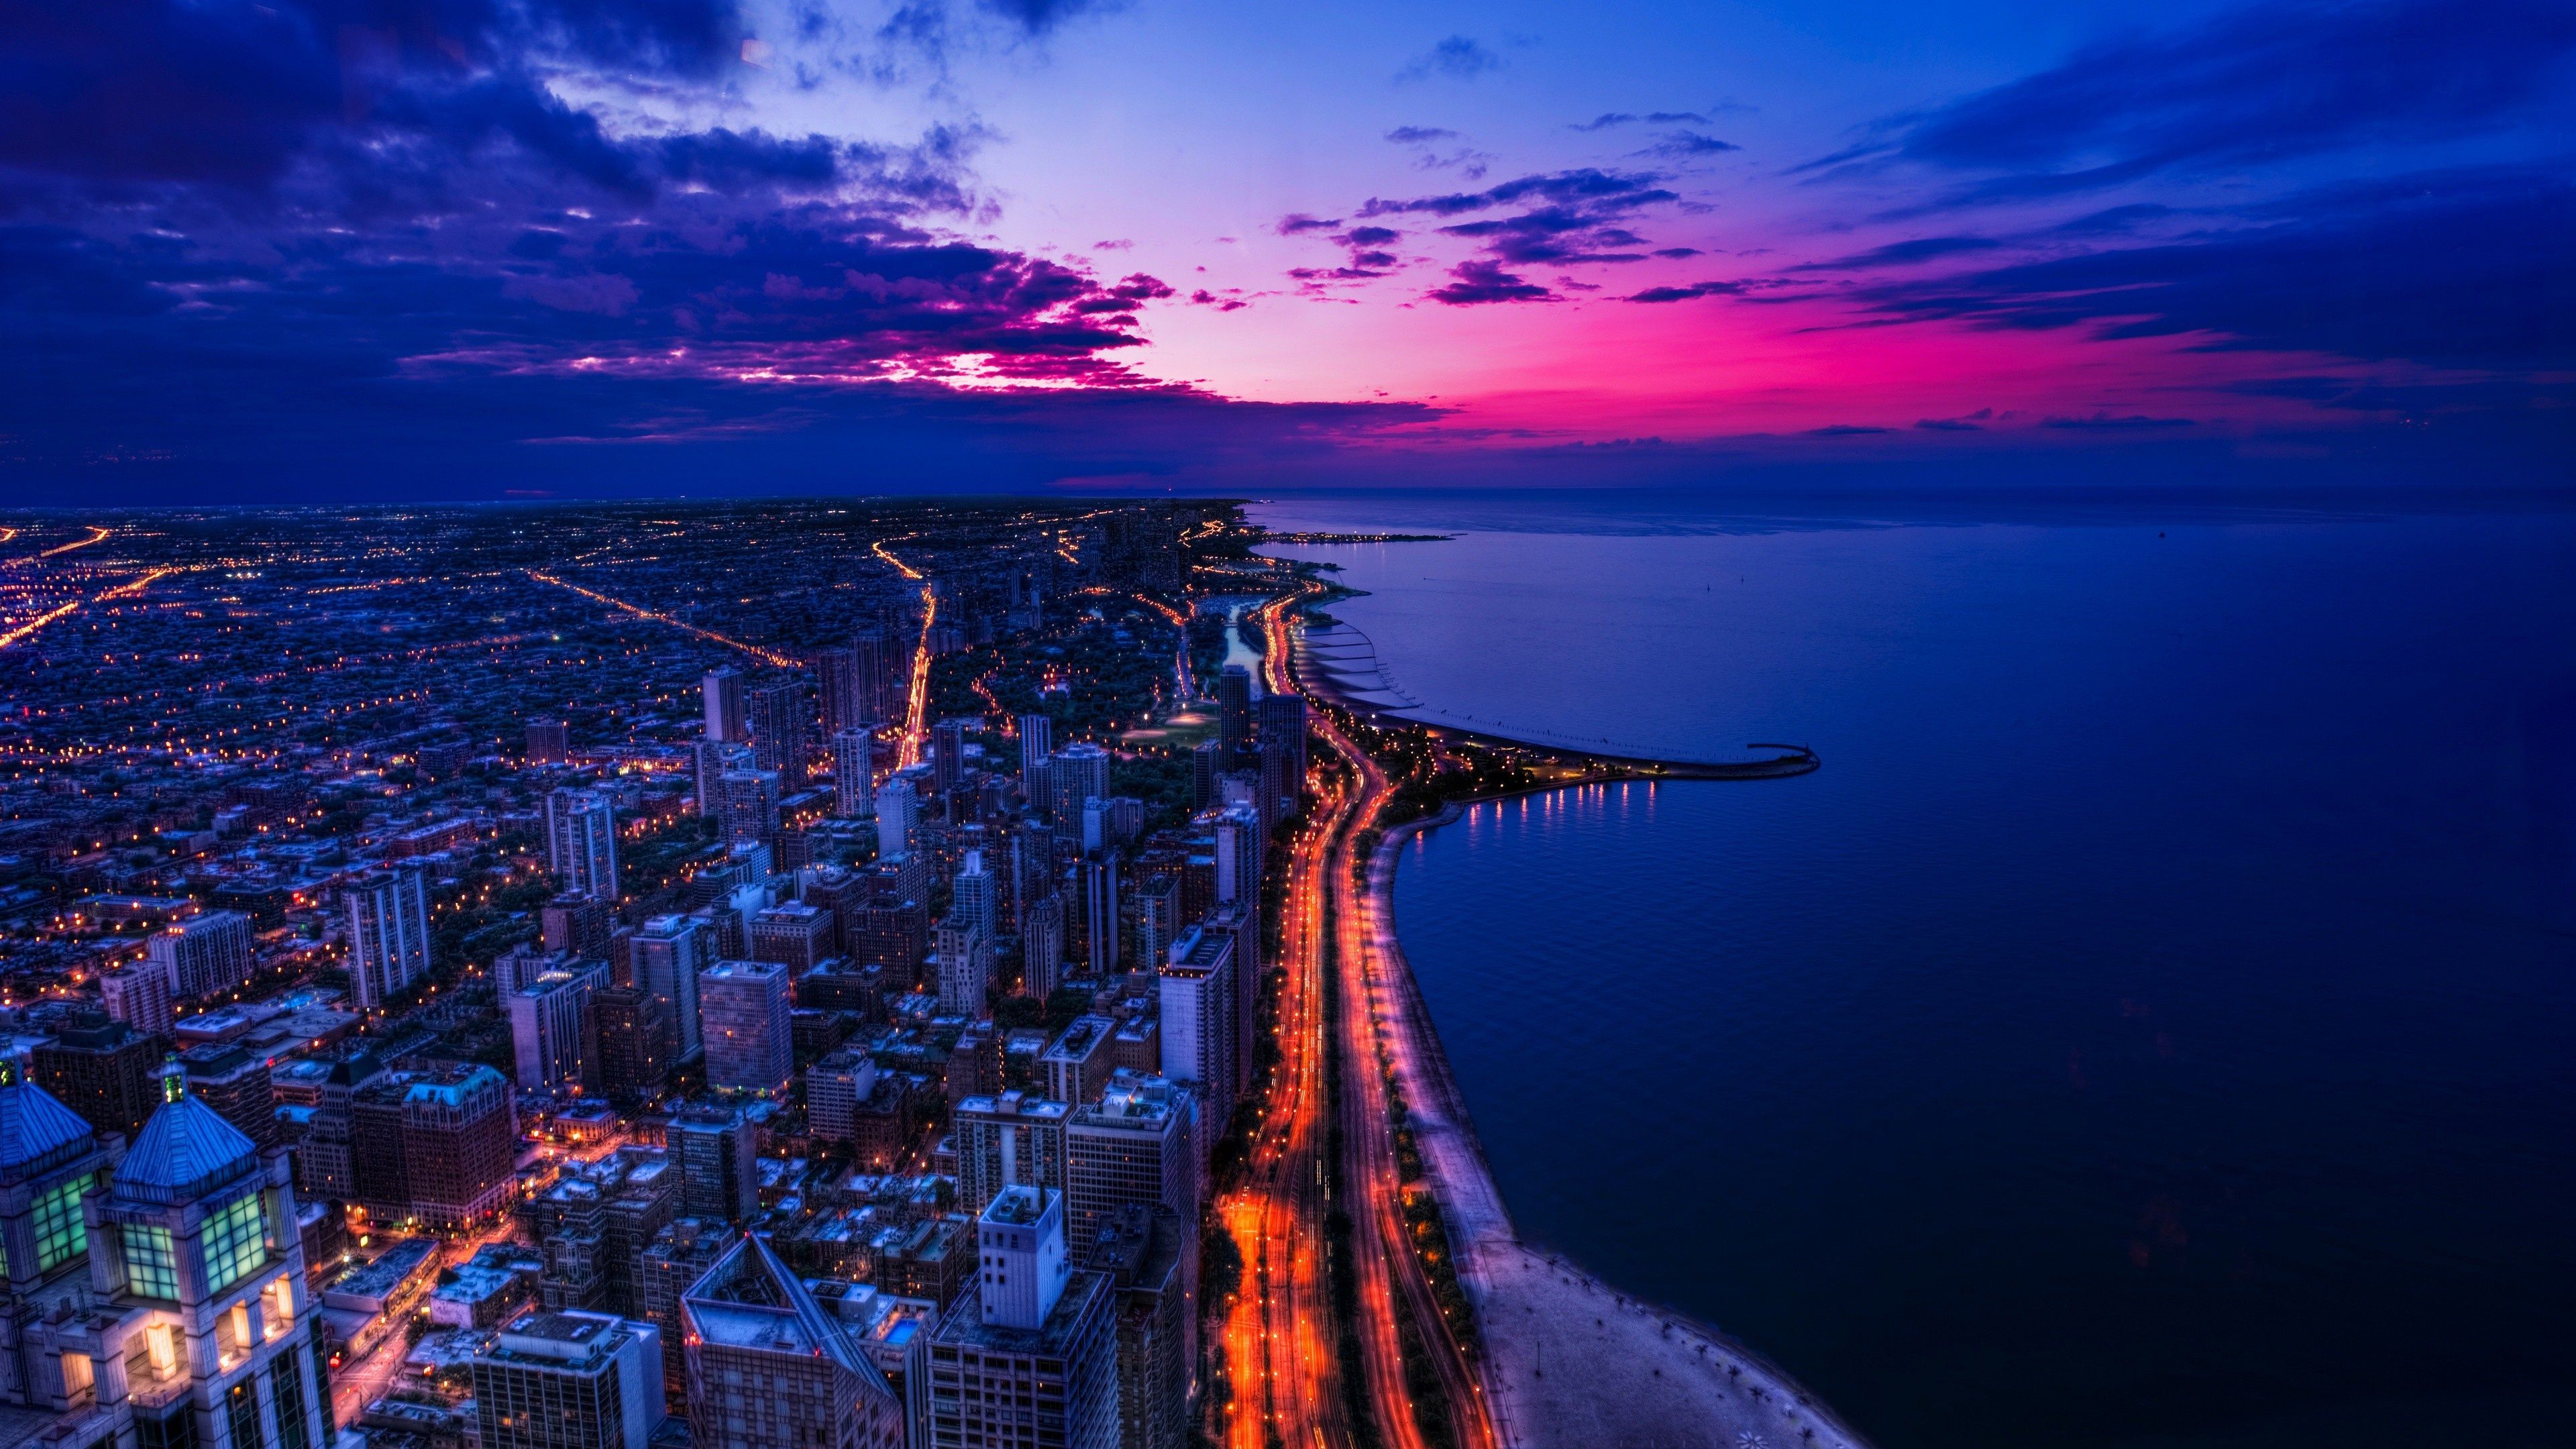 Chicago City View at Sunset Wallpaper, HD City 4K Wallpaper, Image, Photo and Background